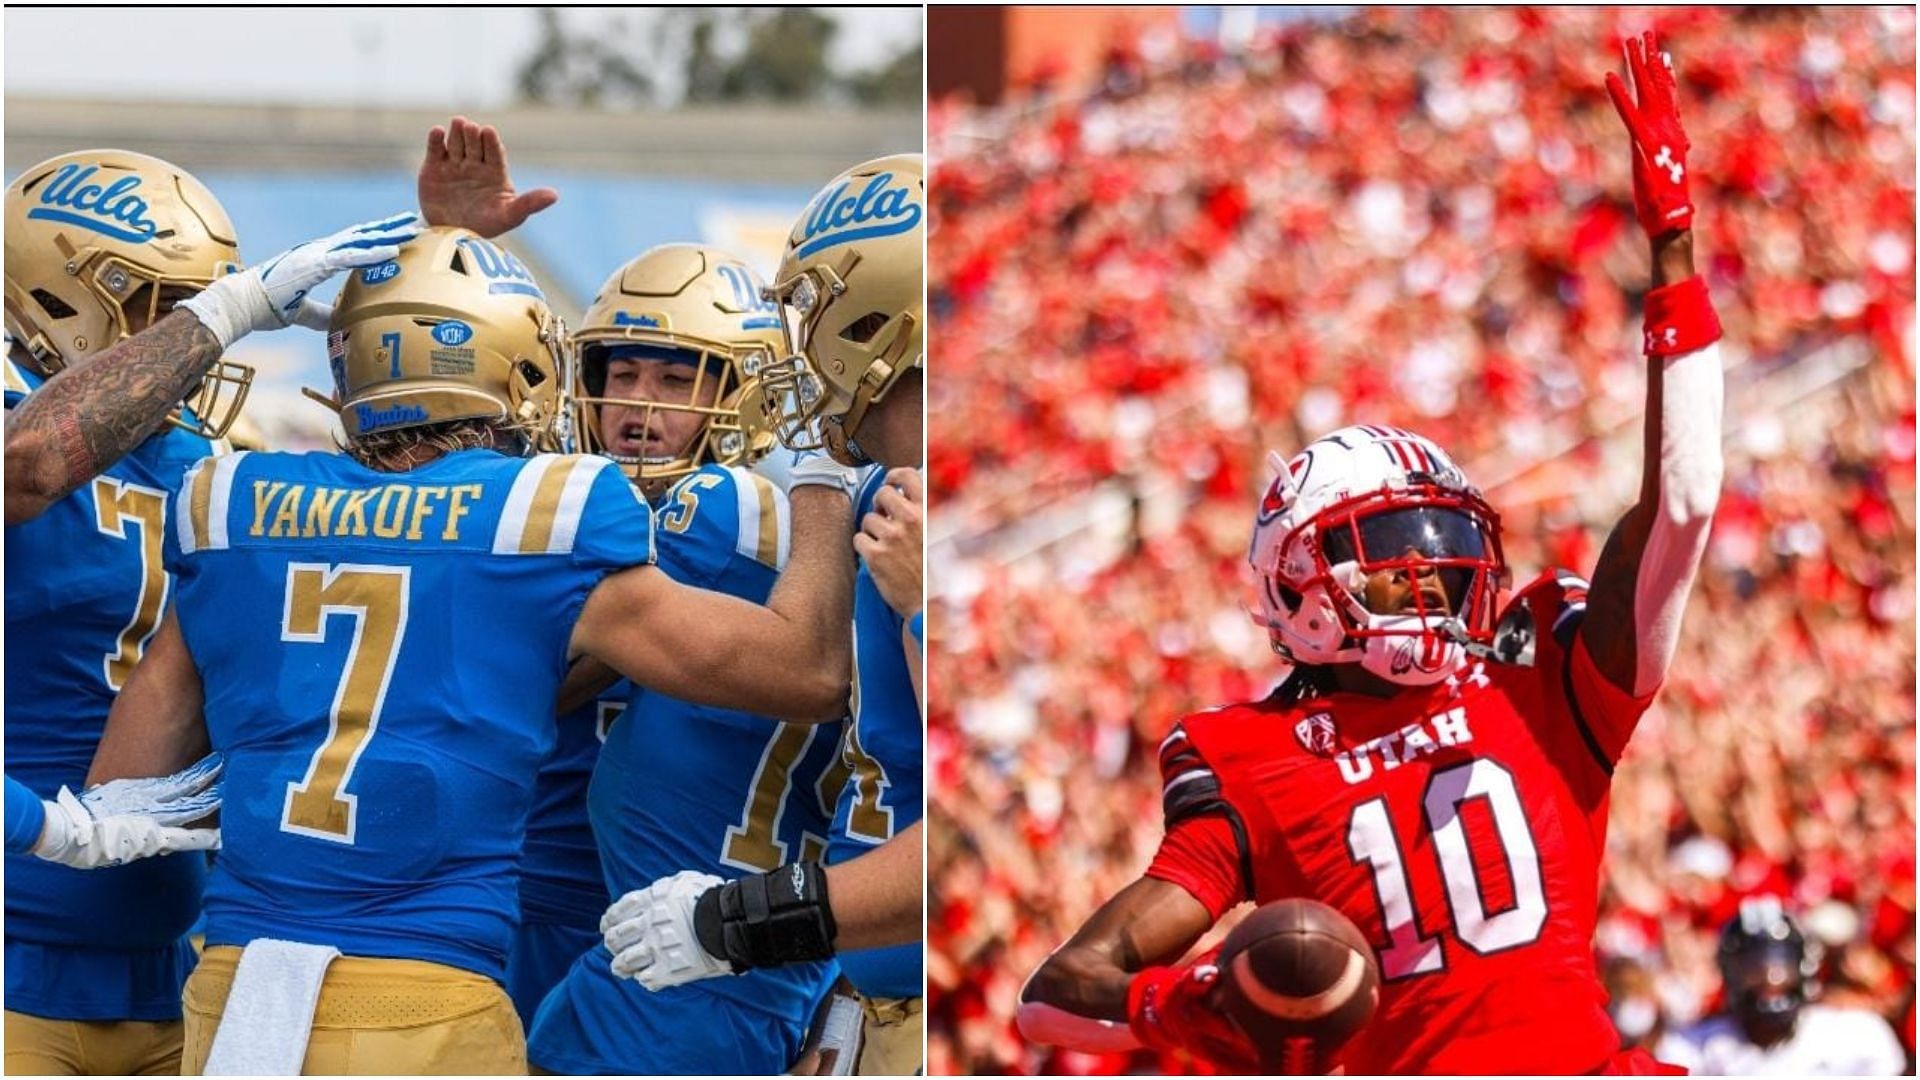 The UCLA Bruins play the Utah Utes in the upcoming weekend